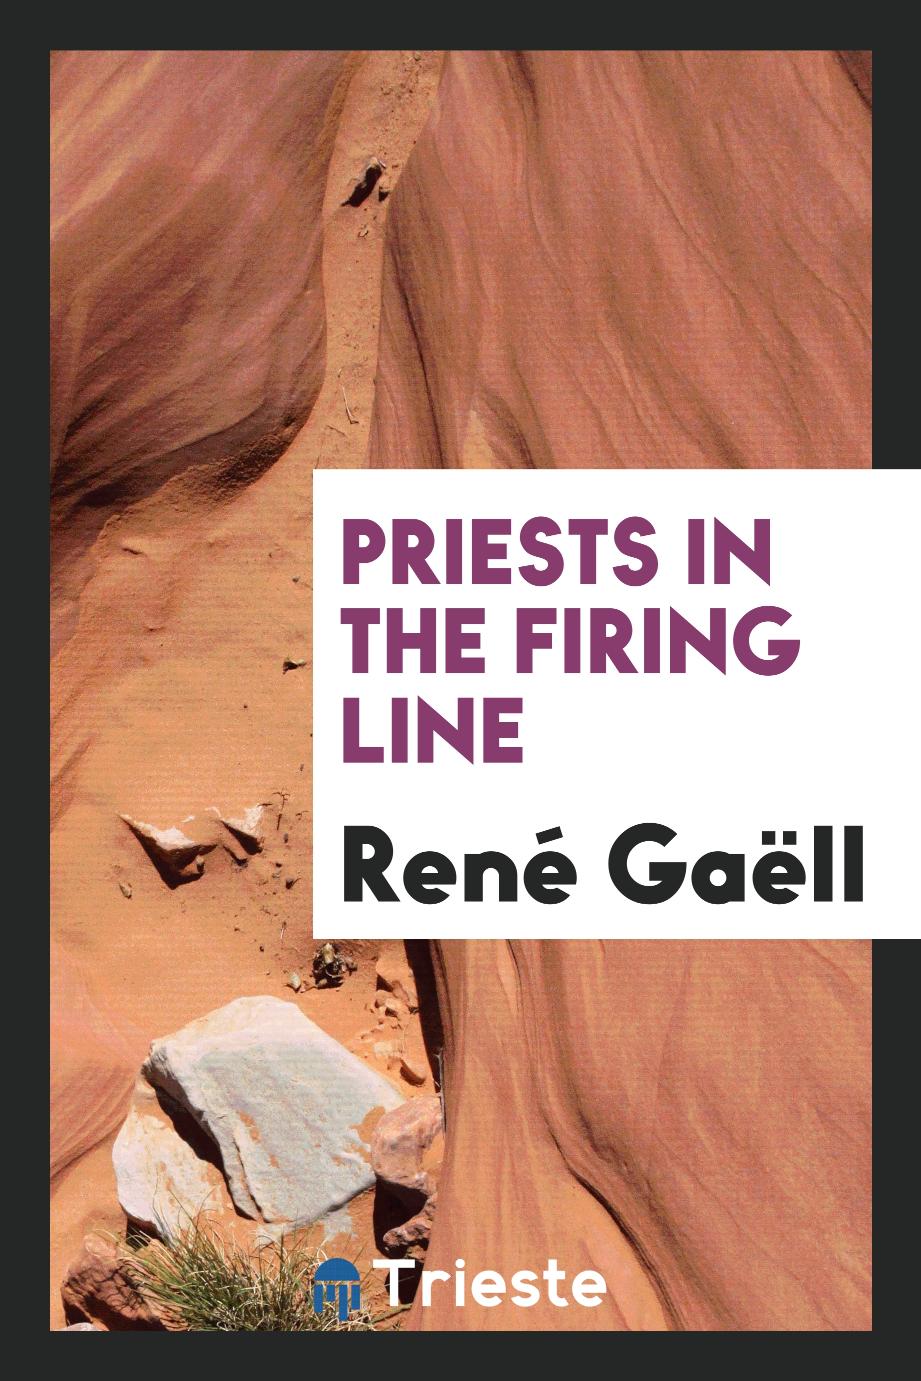 Priests in the firing line